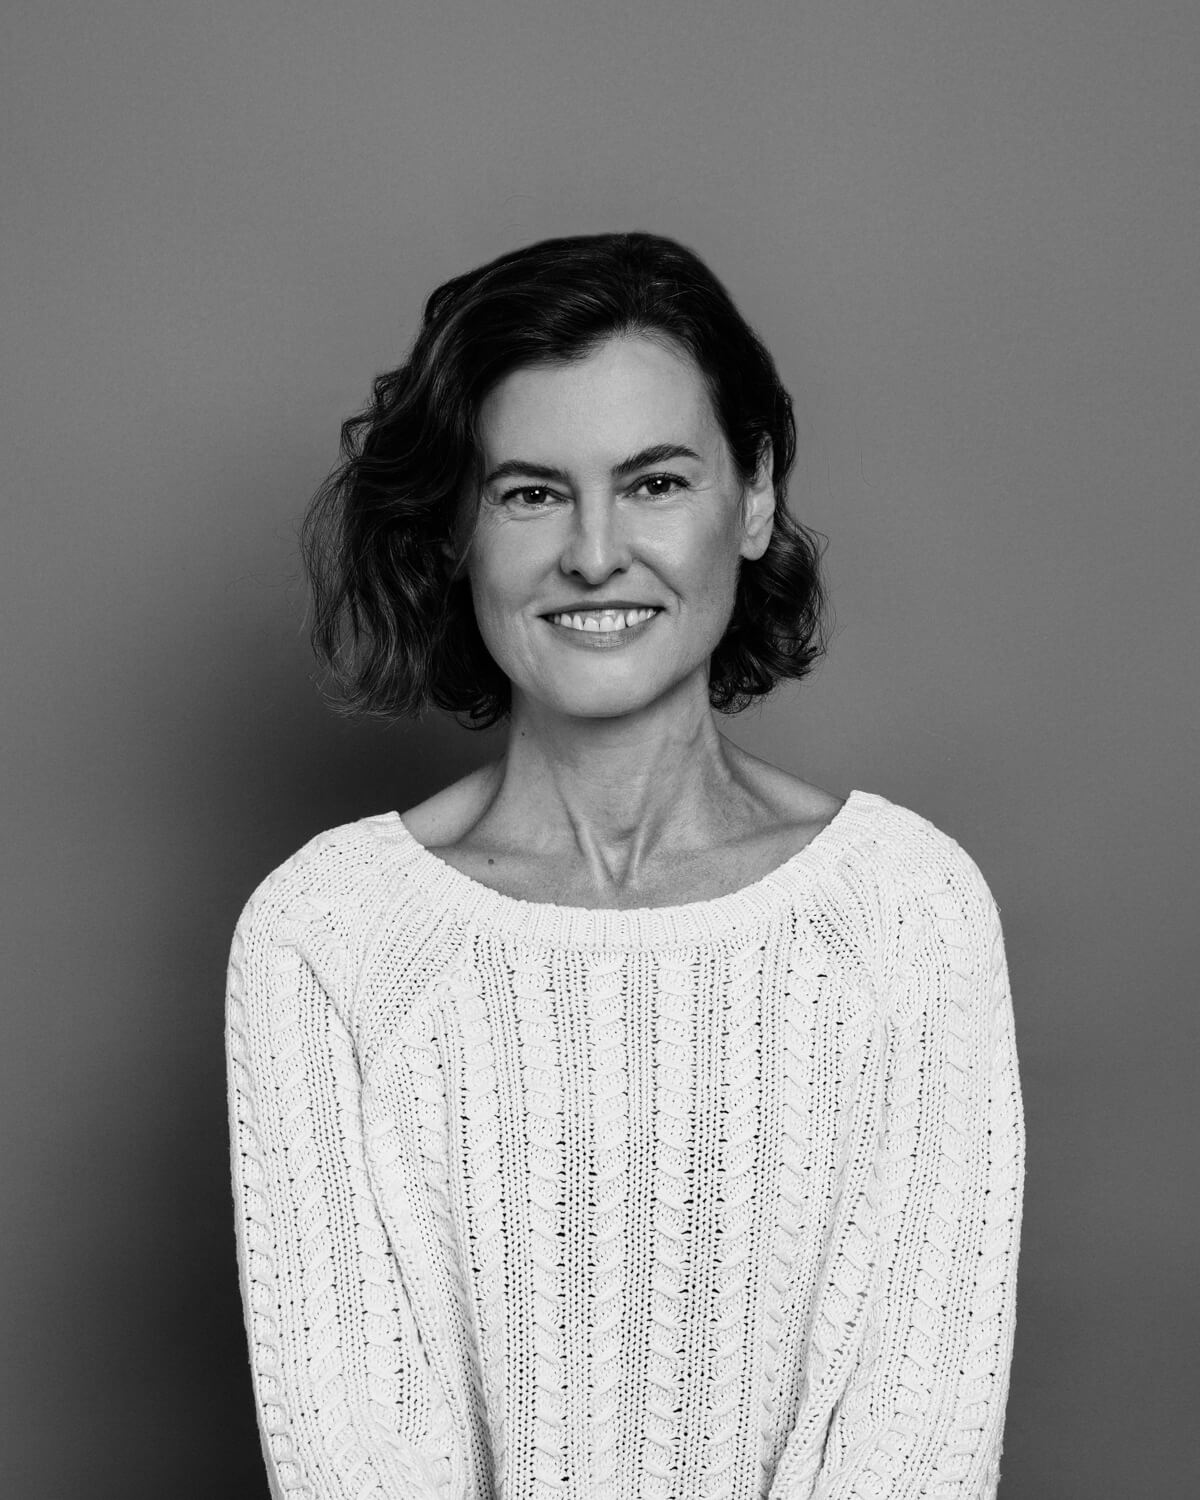 Image of Sydney Dance Company Pilates Instructor Anna Harrison smiling. She is wearing a white sweater and has short brown hair.